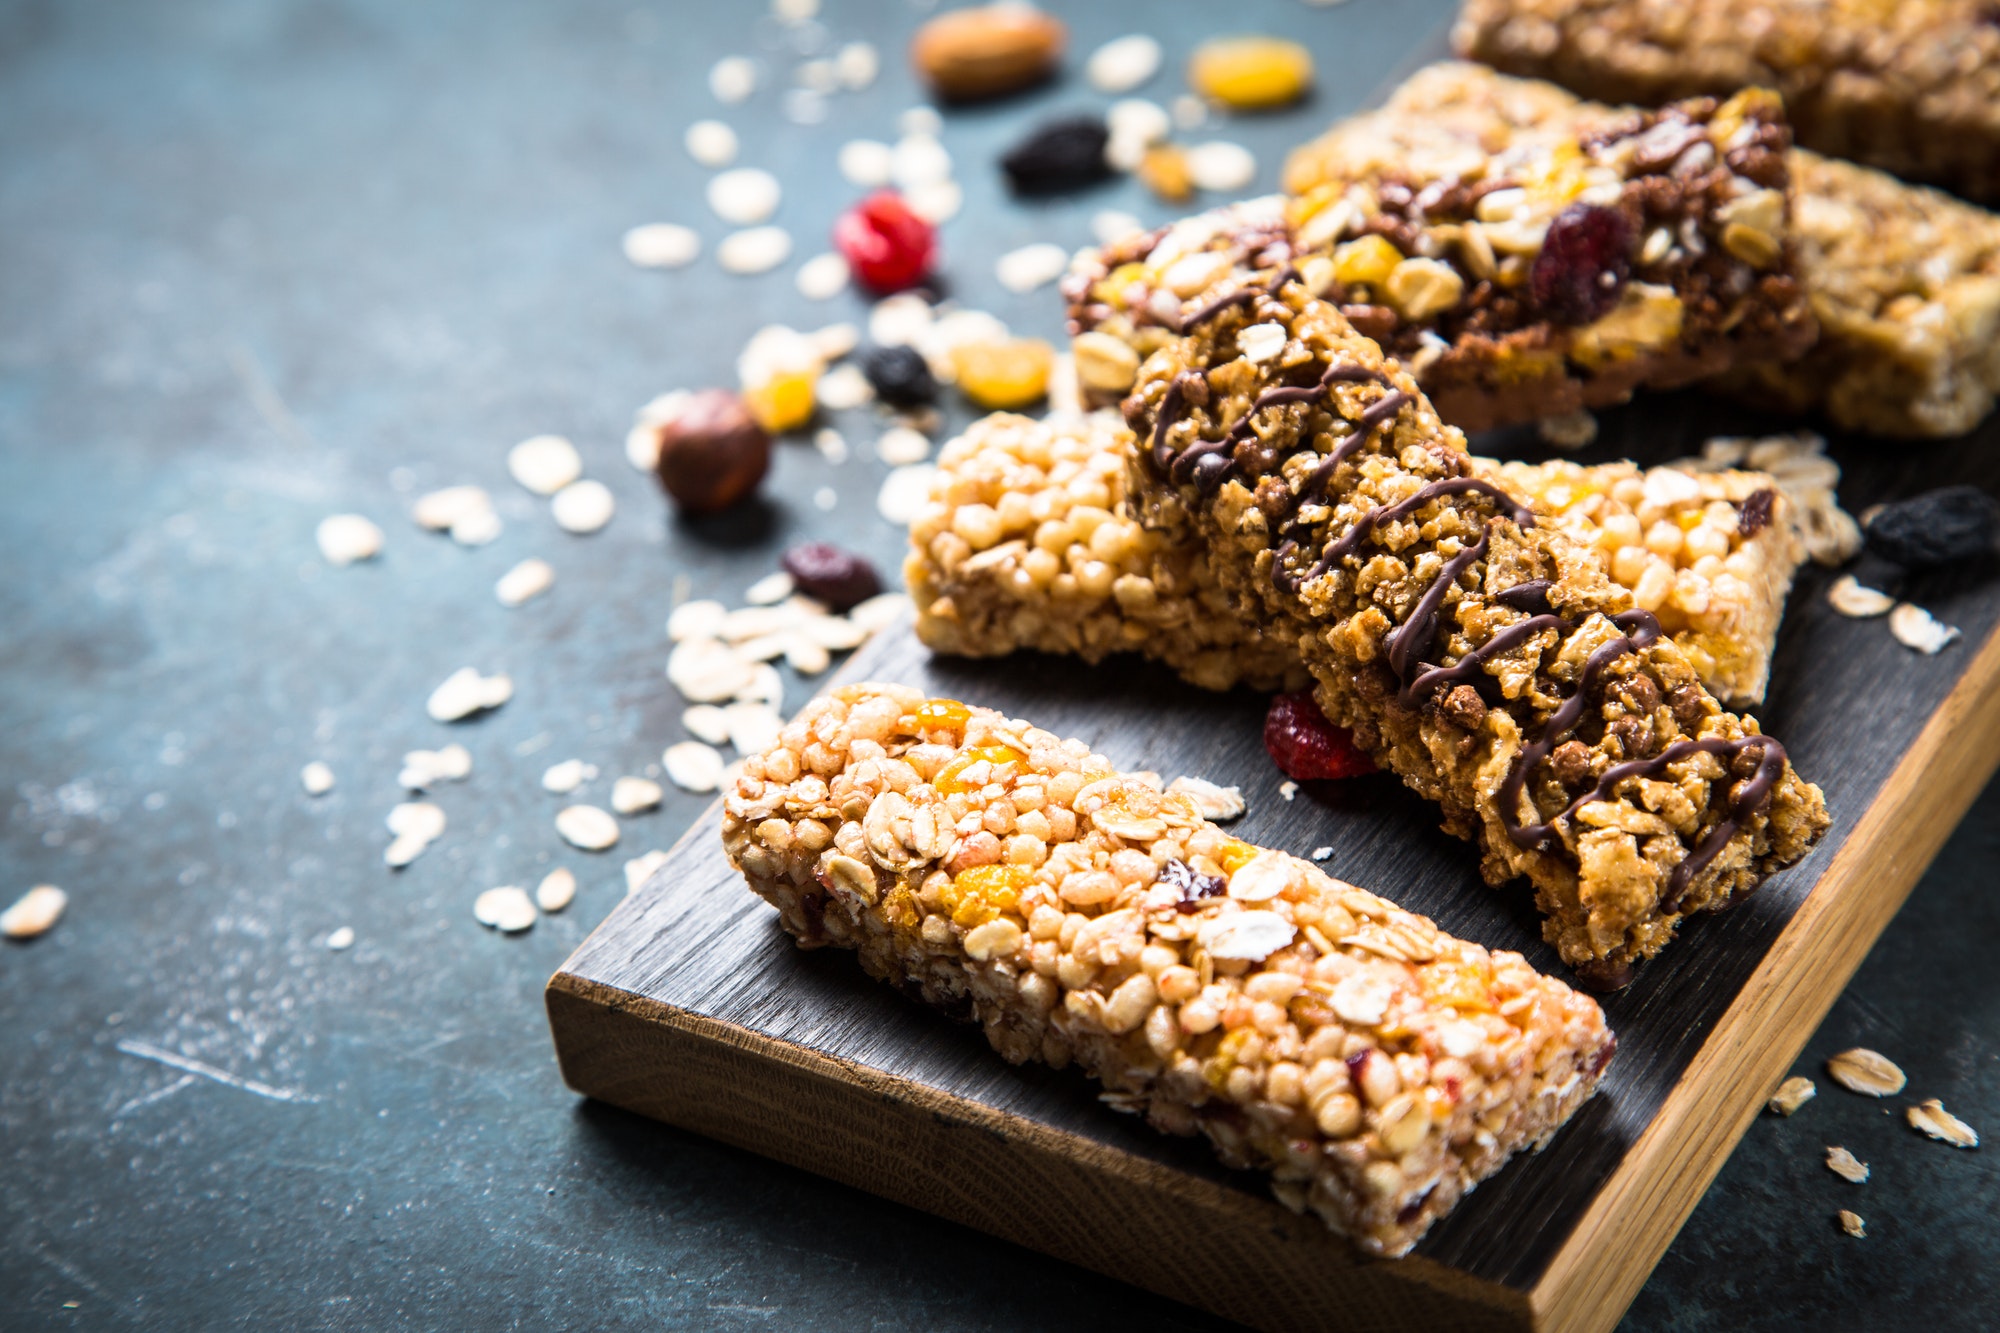 Granola bar with nuts, fruit and berries on black